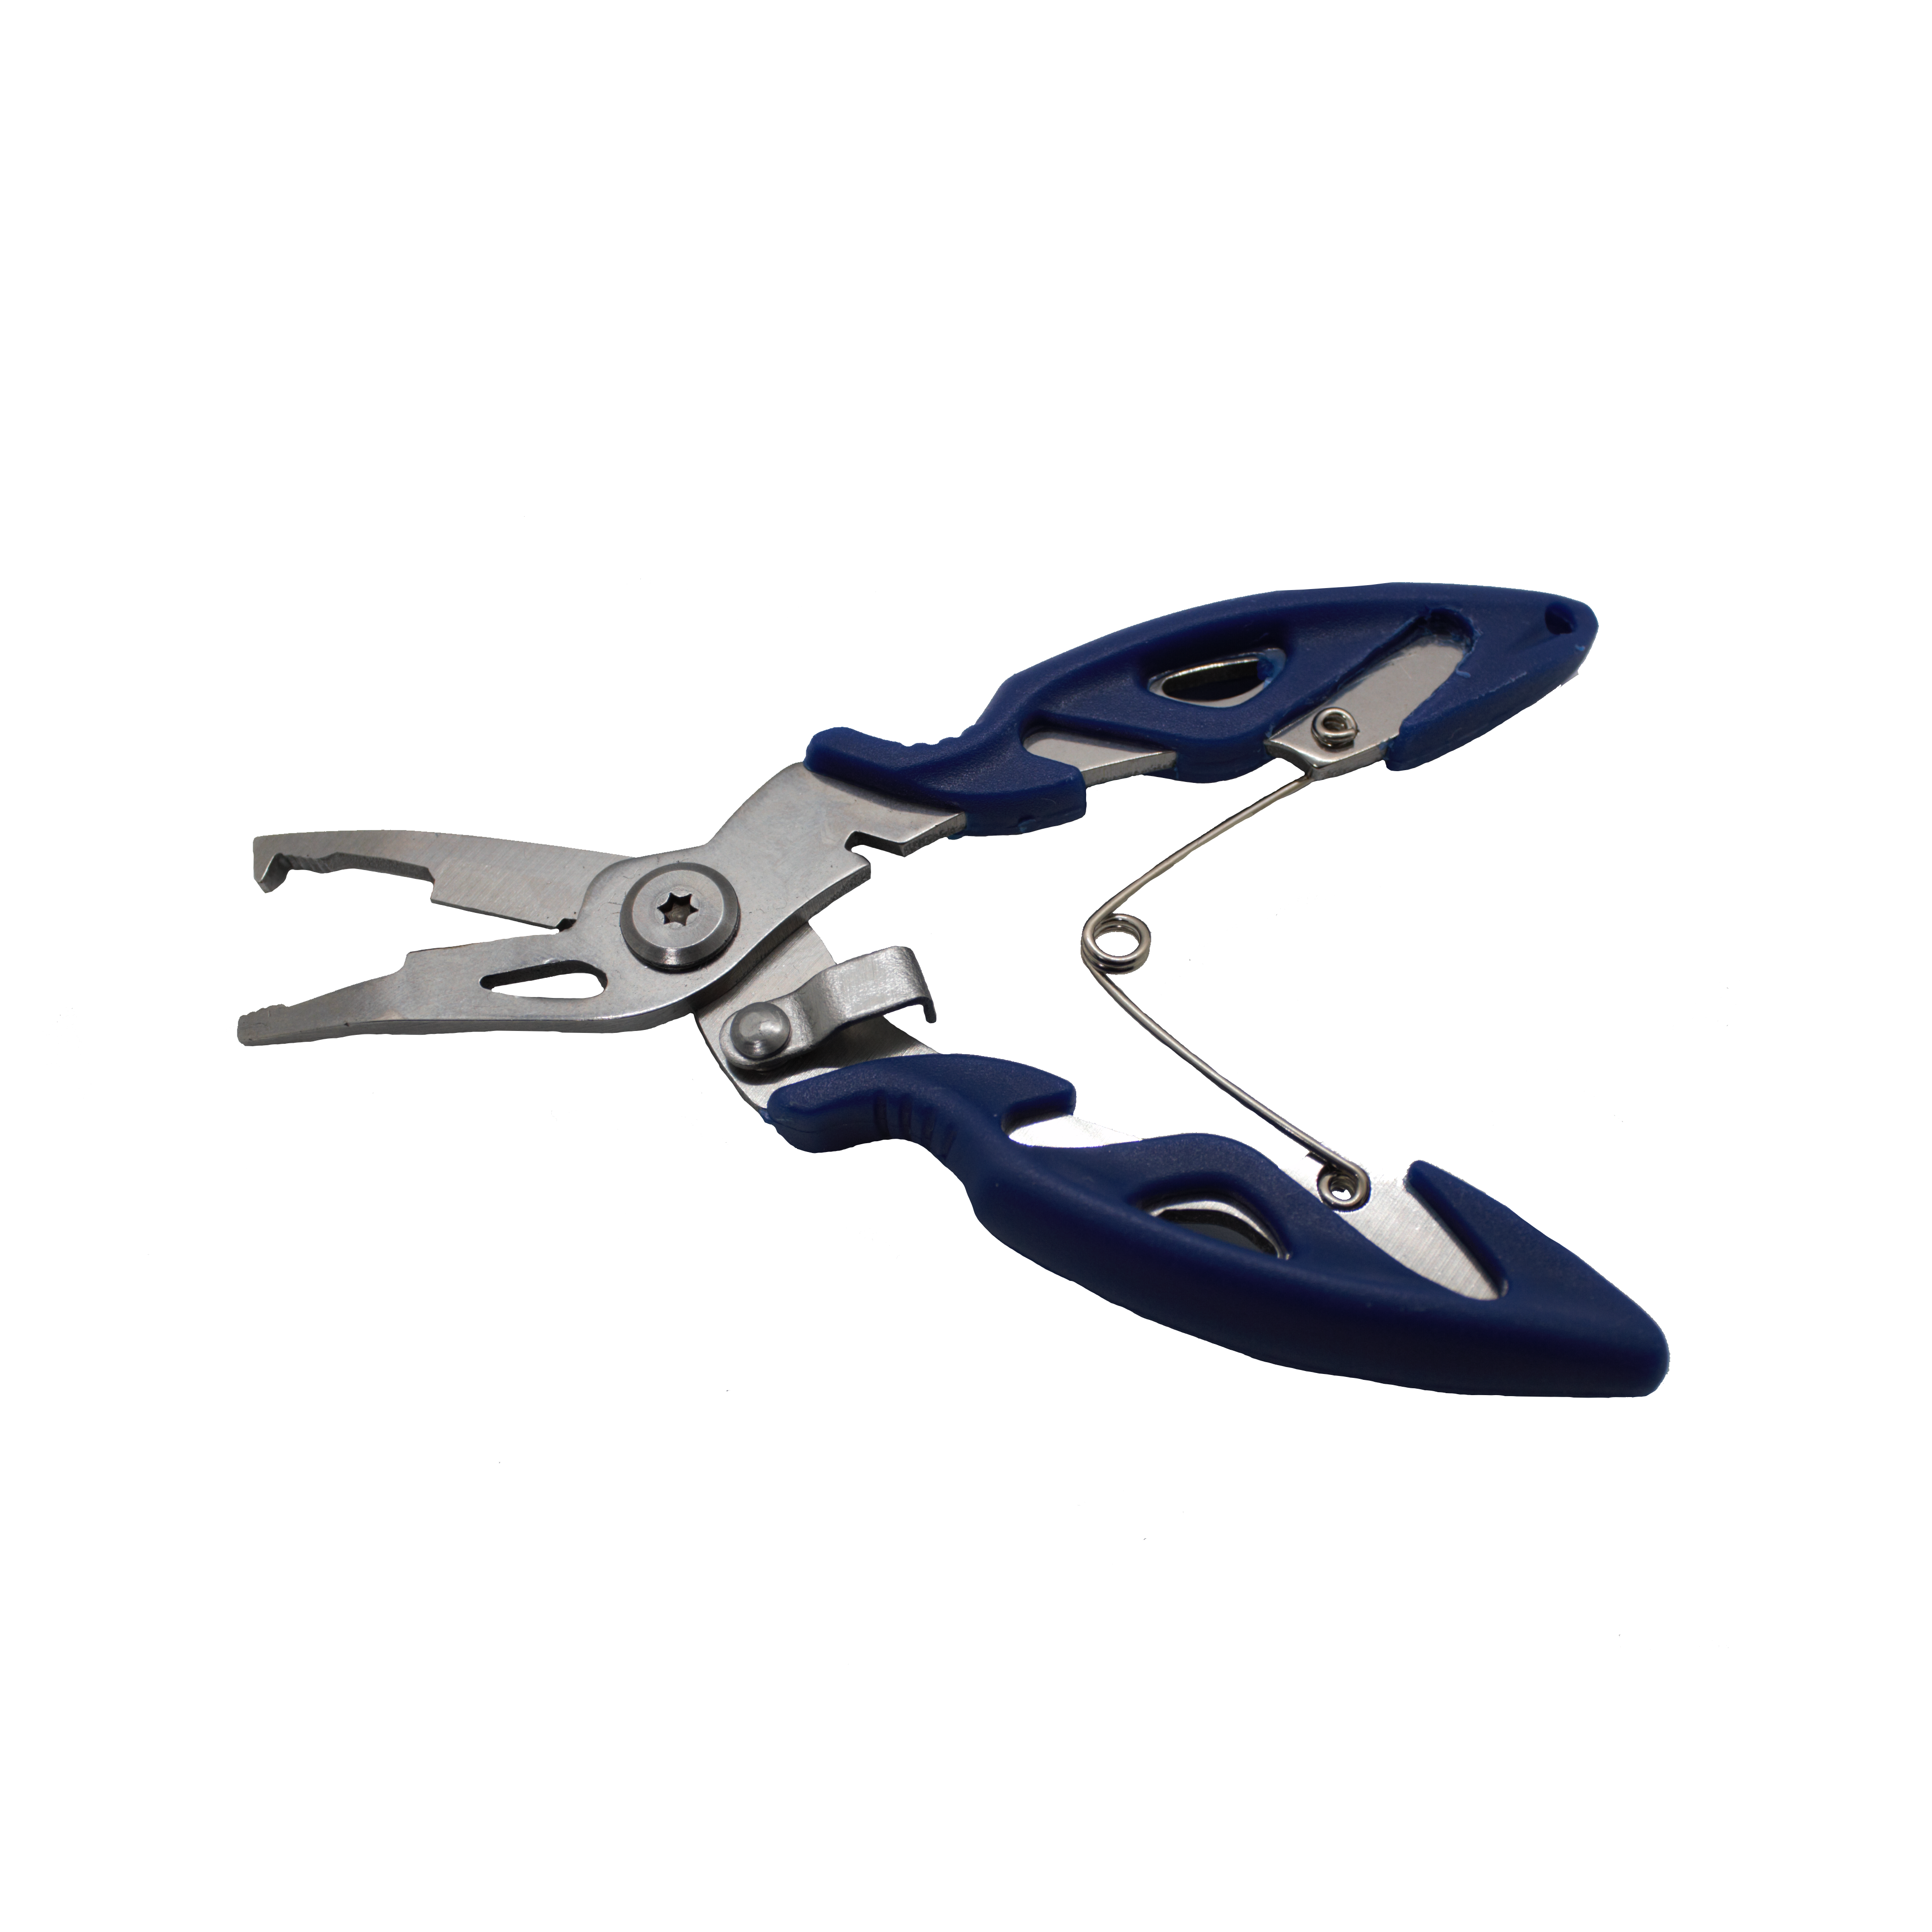 Walbest Durable ABS Fishing Plier Saltwater Hook Remover Plier